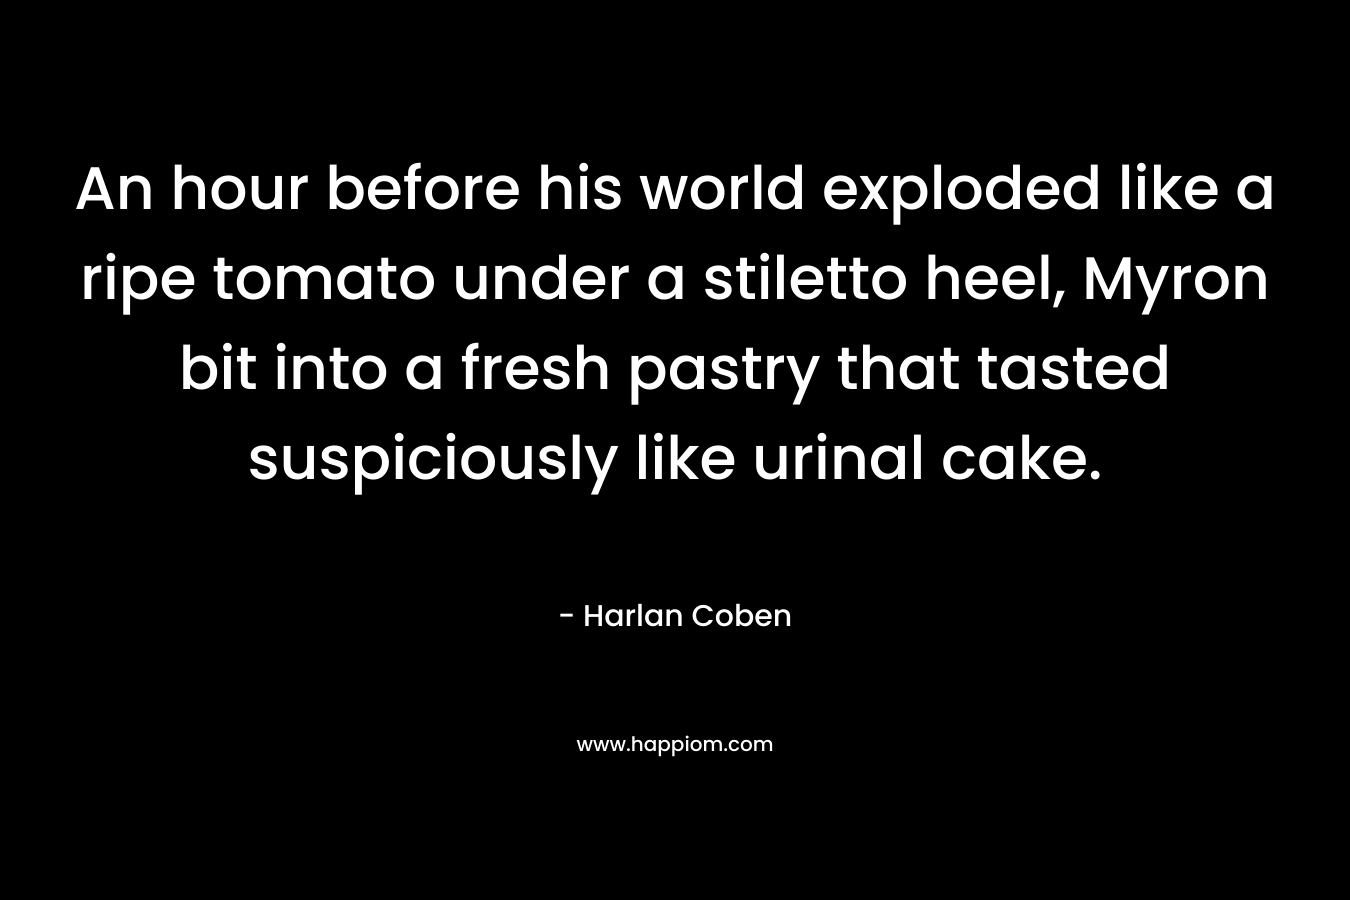 An hour before his world exploded like a ripe tomato under a stiletto heel, Myron bit into a fresh pastry that tasted suspiciously like urinal cake. – Harlan Coben